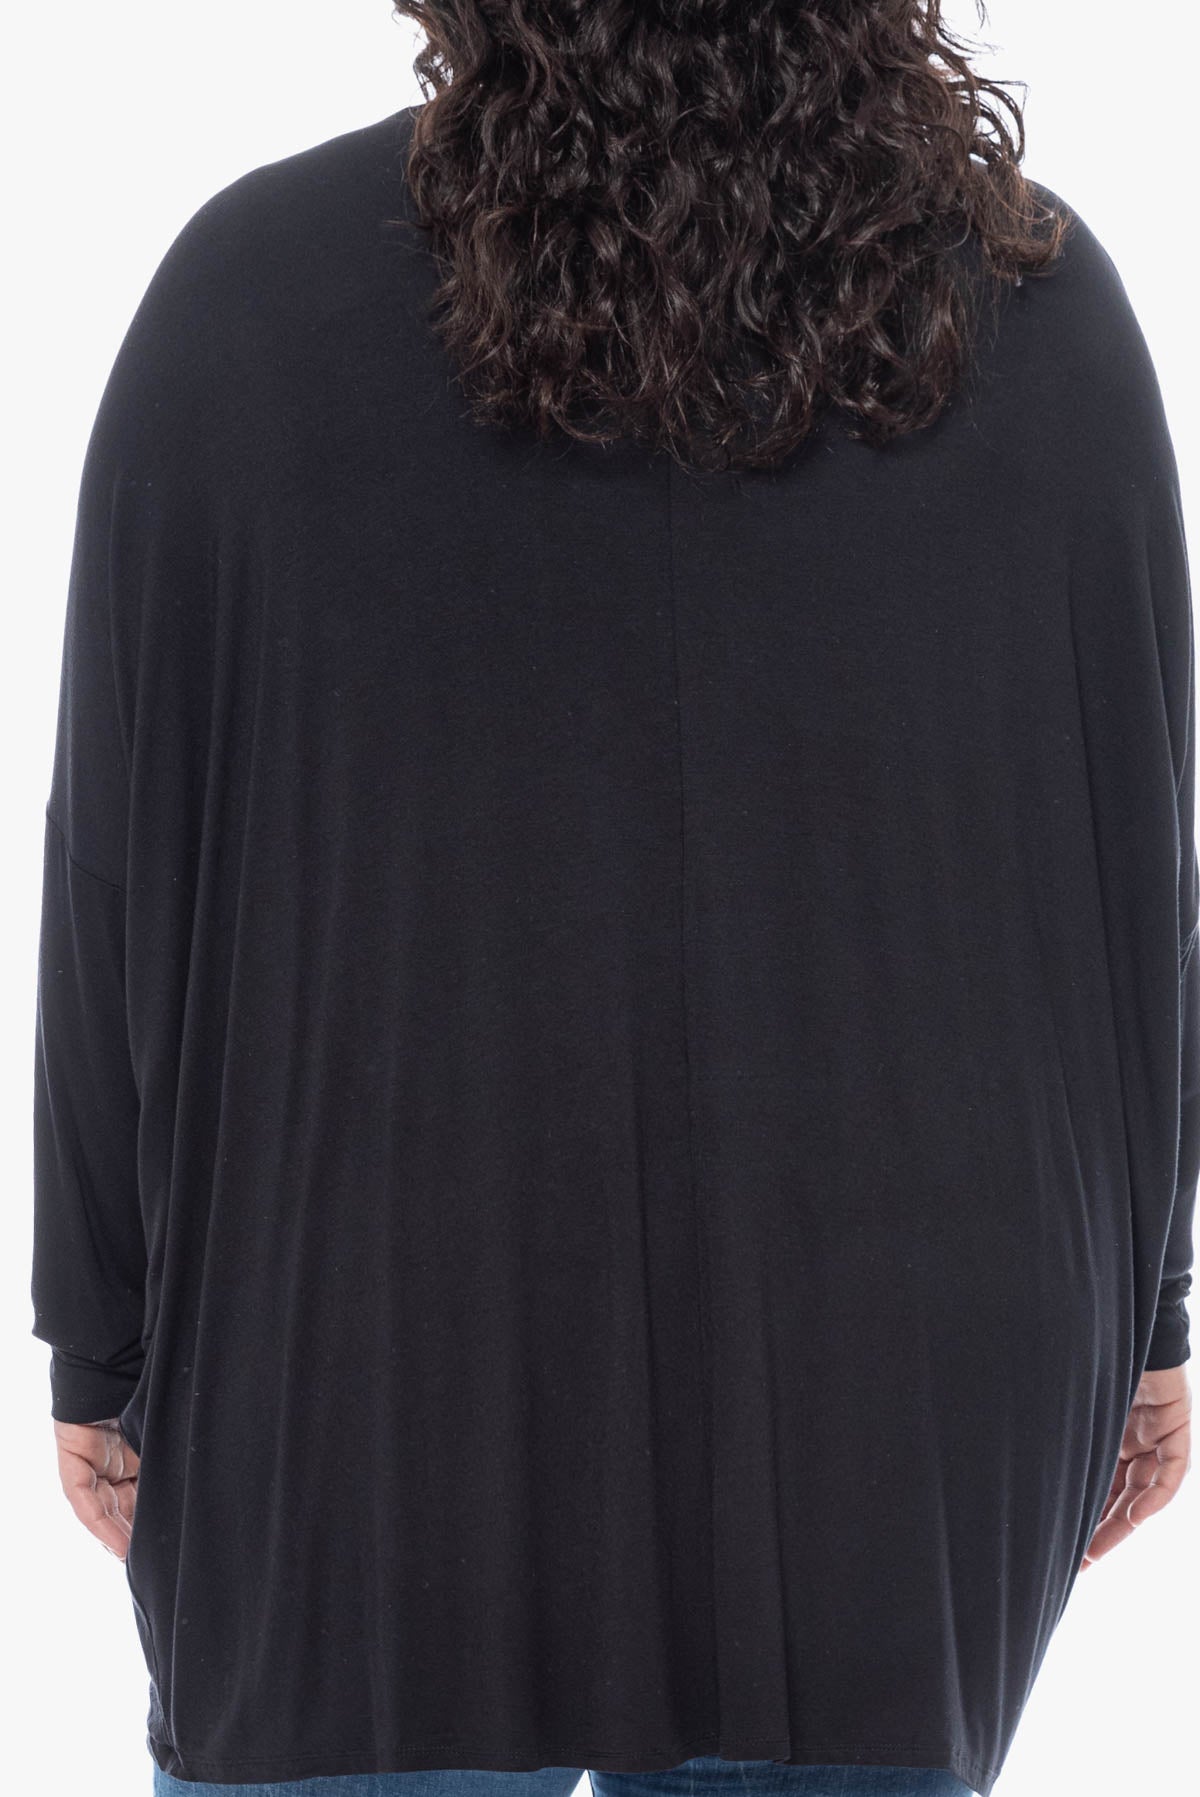 SHAWN R oversized top